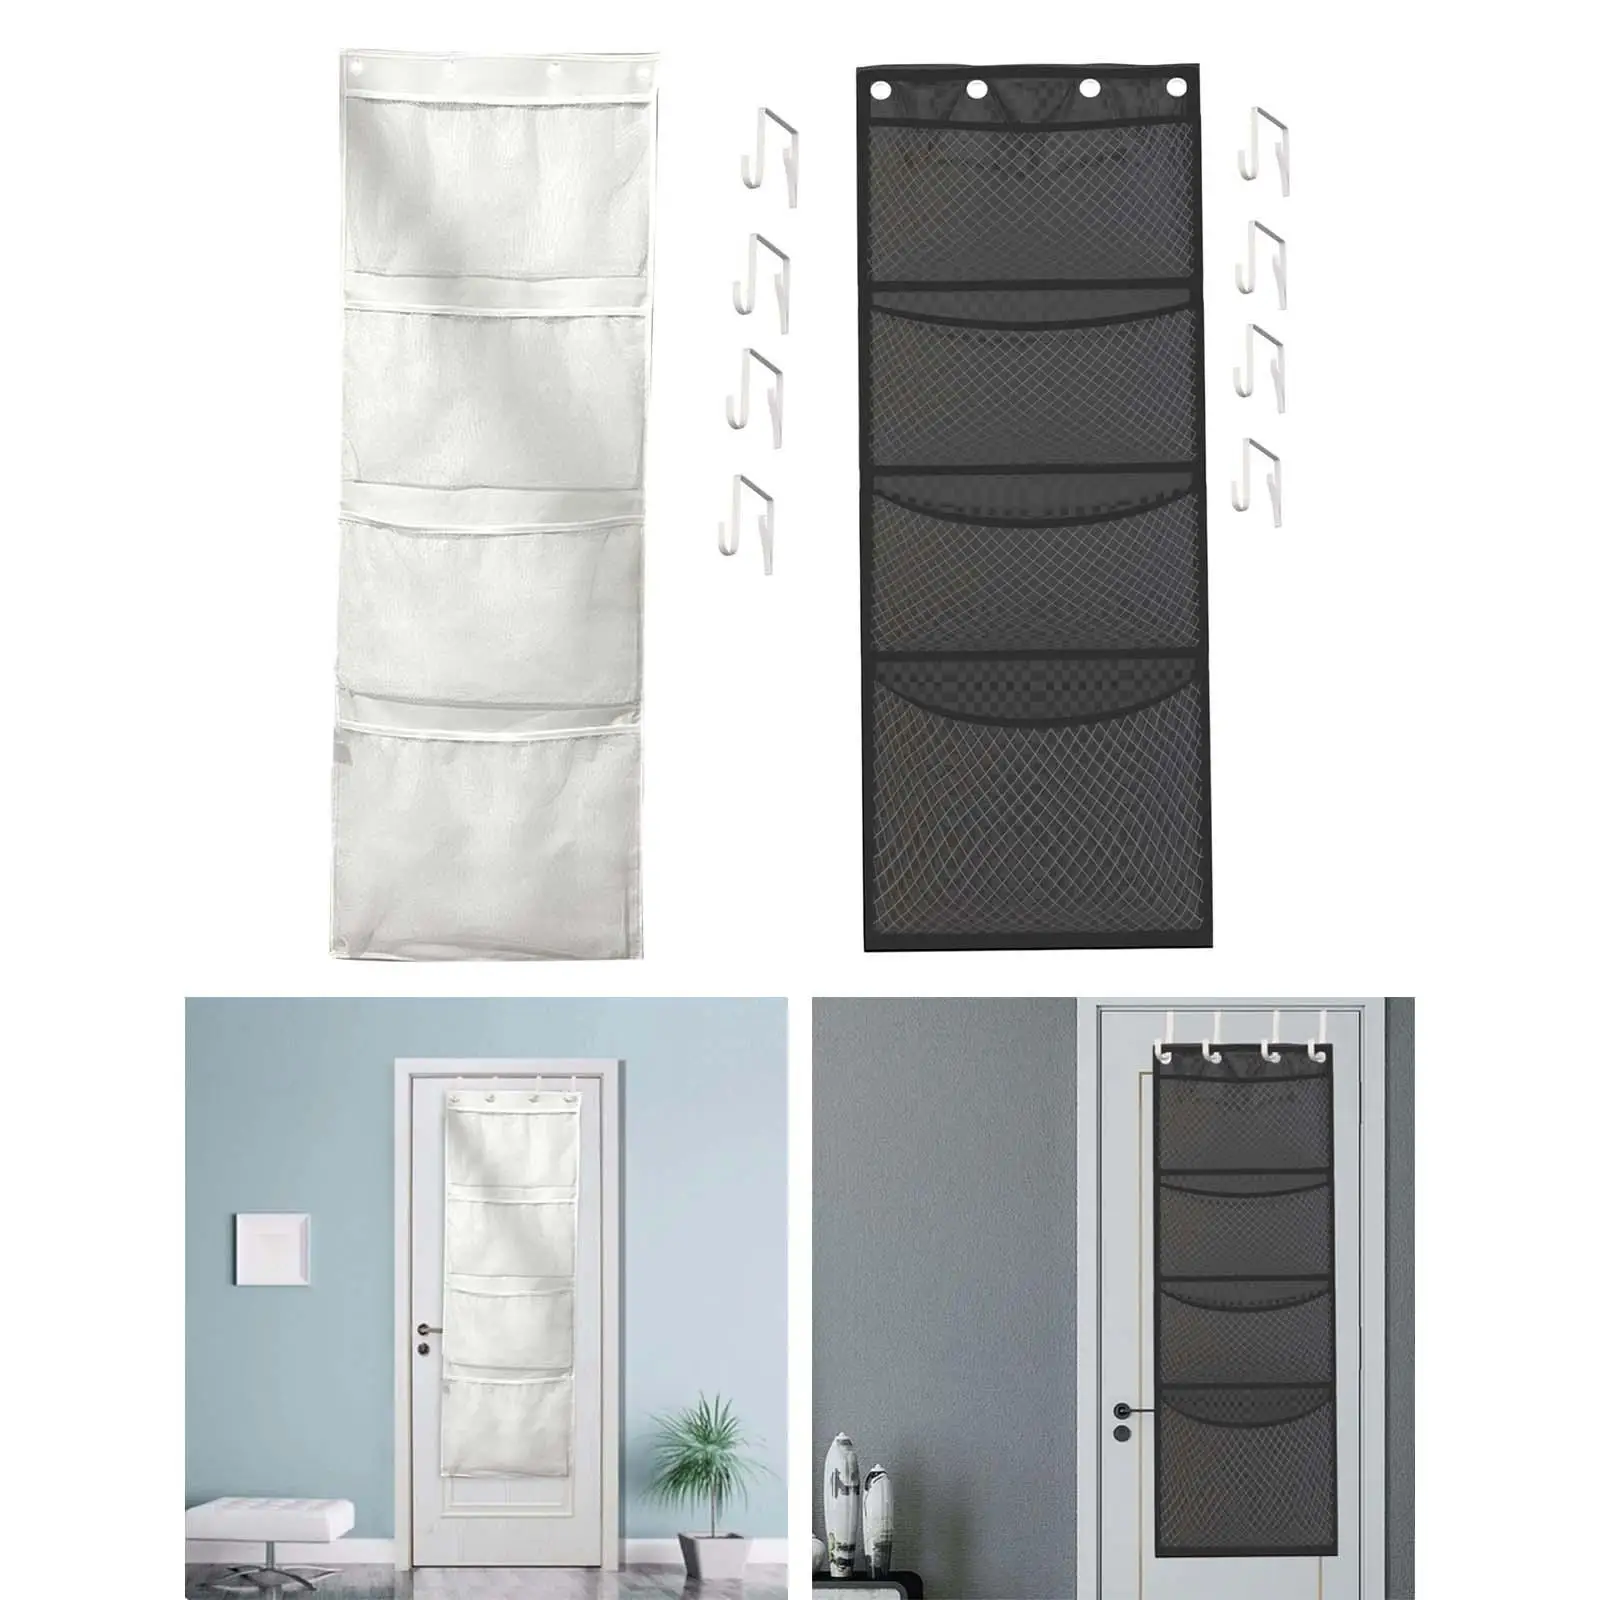 Over The Door Hanging Organizer Bag 4 Mesh Pocket for Kids Shoes, Clothes, Gloves, Scarves, Diapers Kids Room Laundry Room